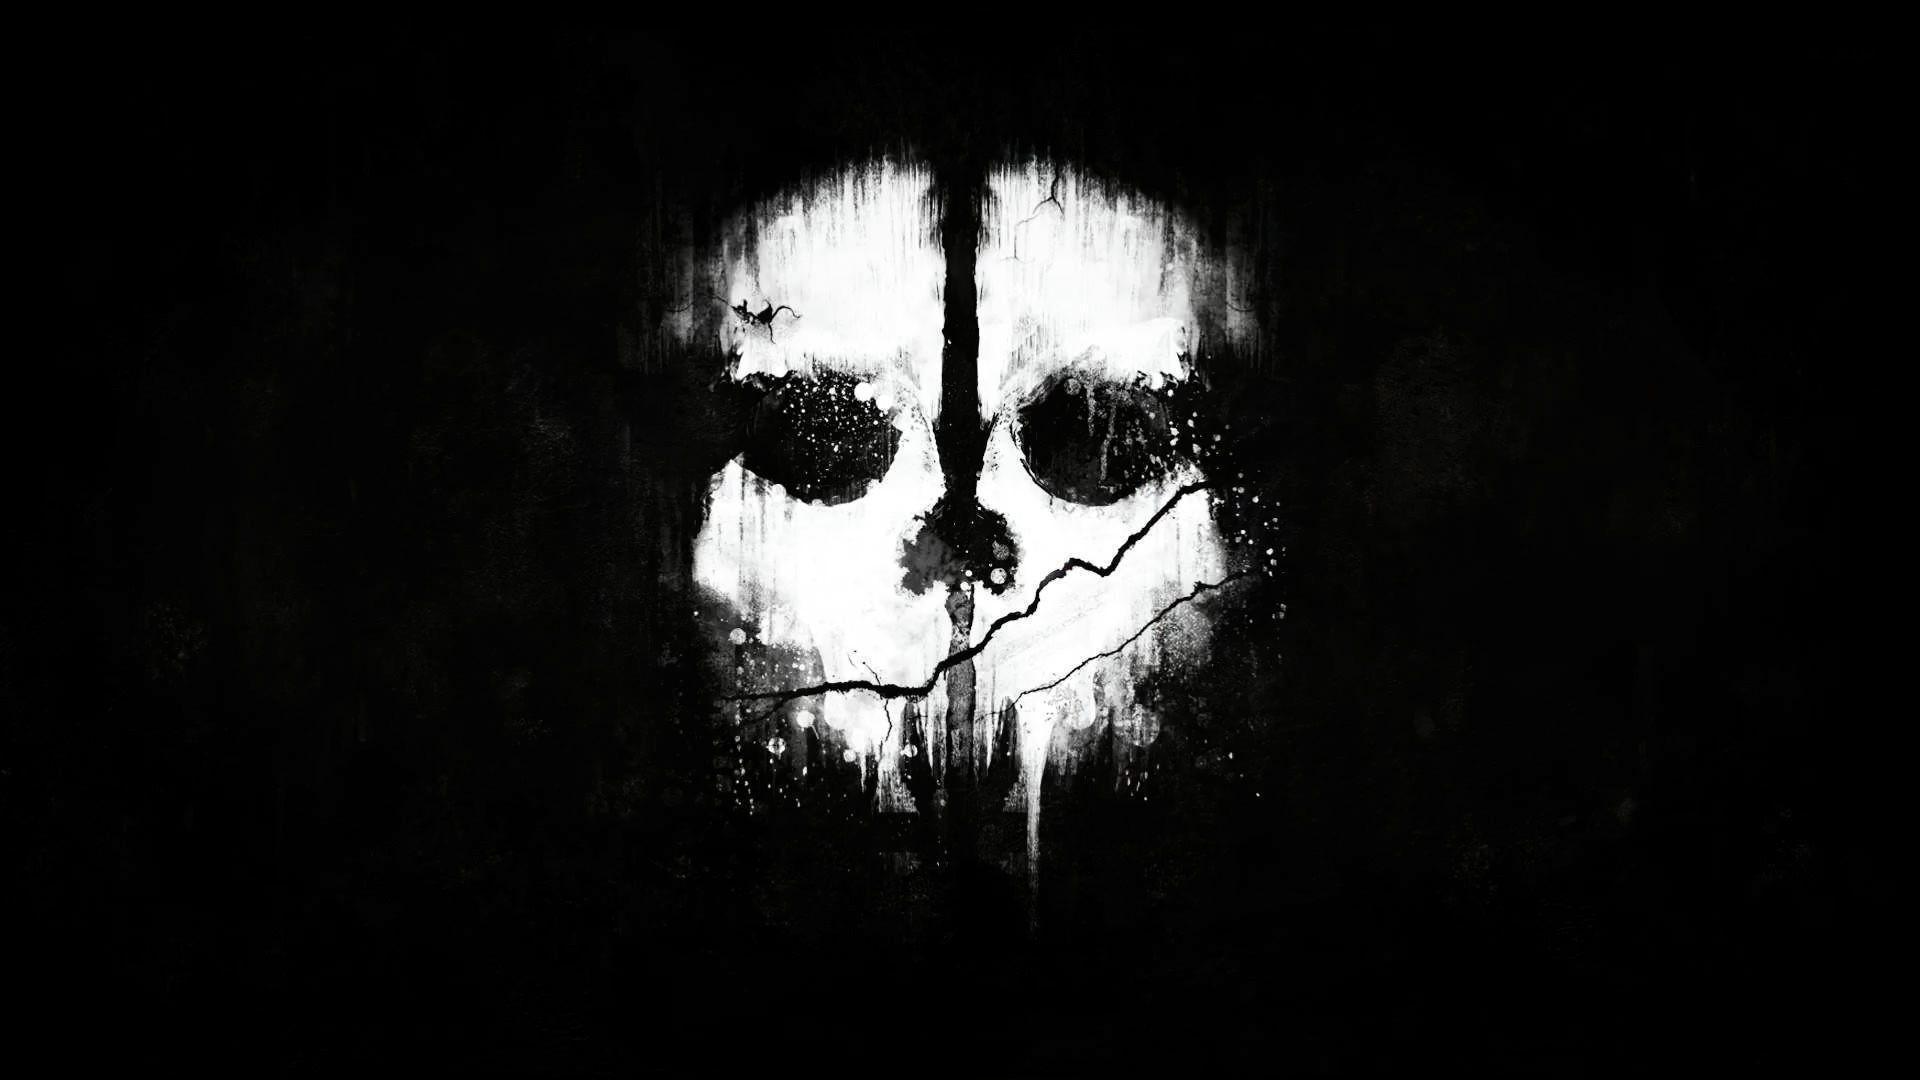 Call of Duty Ghosts Wallpaper 1920x1080 in HD. Call of Duty